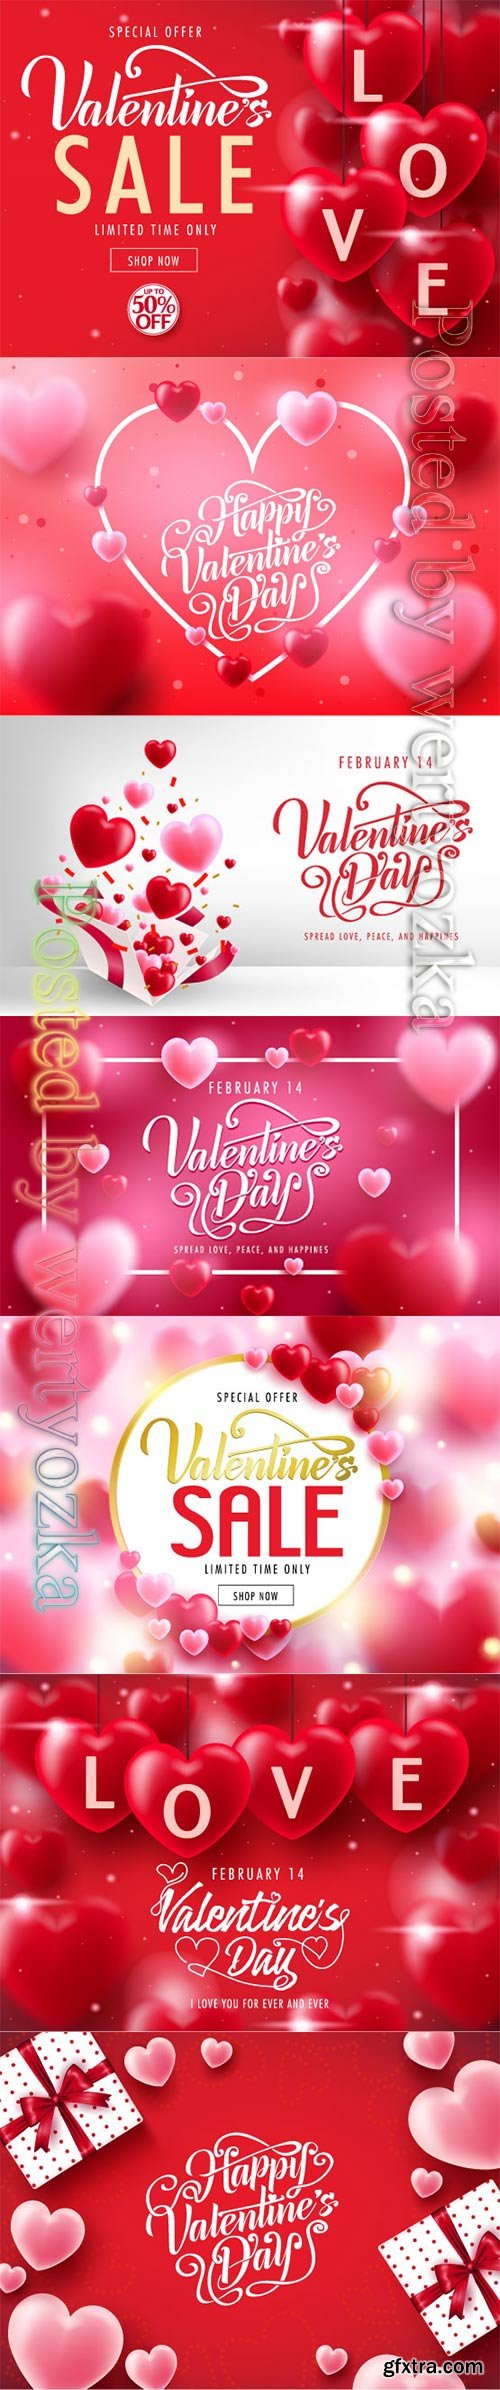 Valentine's Day decorative lovely greeting vector card